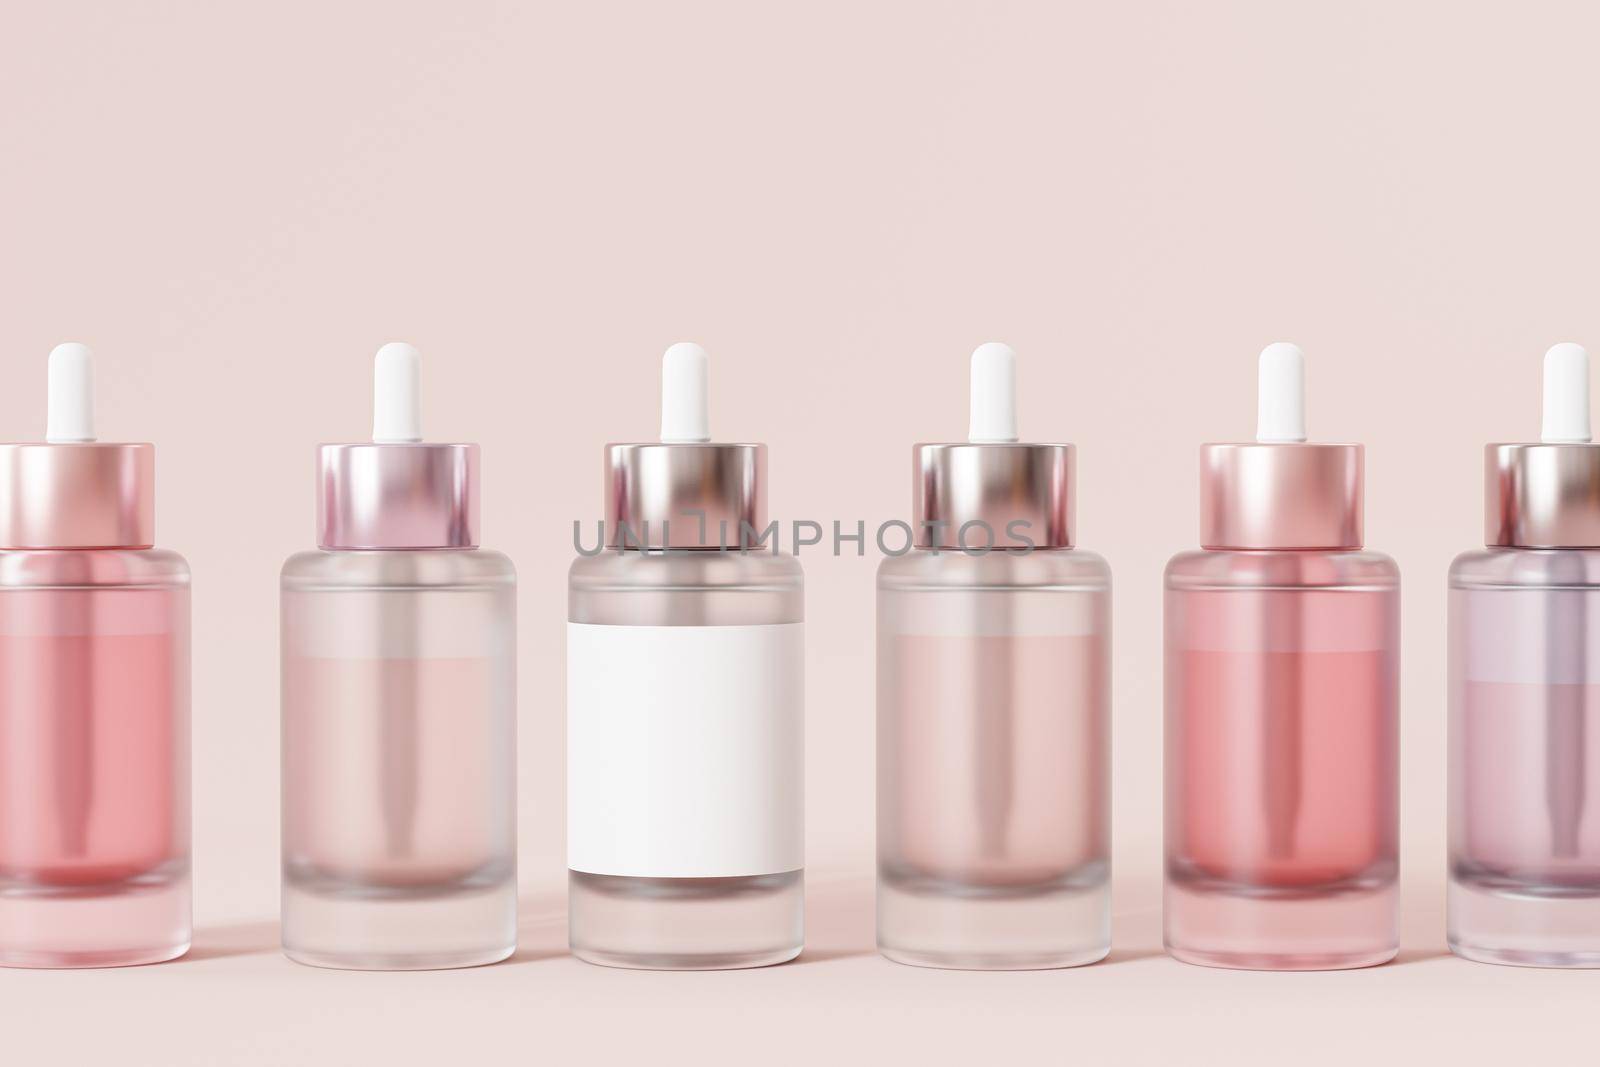 Mockup glass bottles with label in row for cosmetics or care products, template or advertising, beige background, 3d illustration render